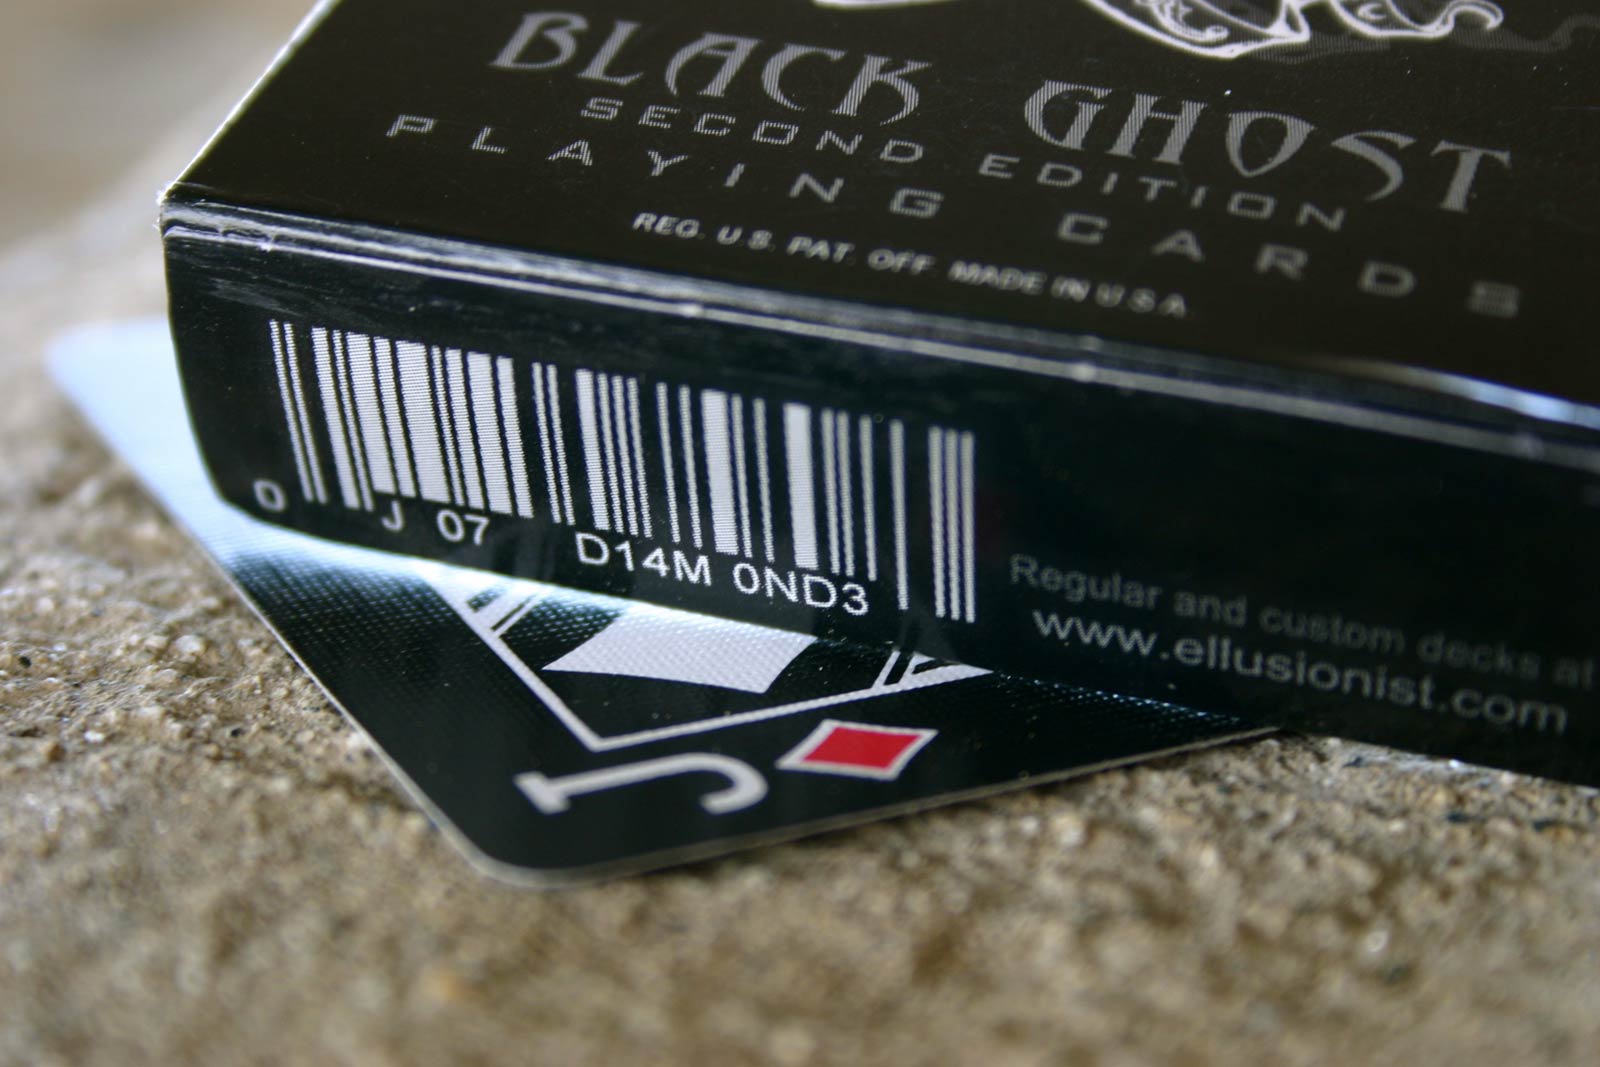 Black Ghost Playing Cards